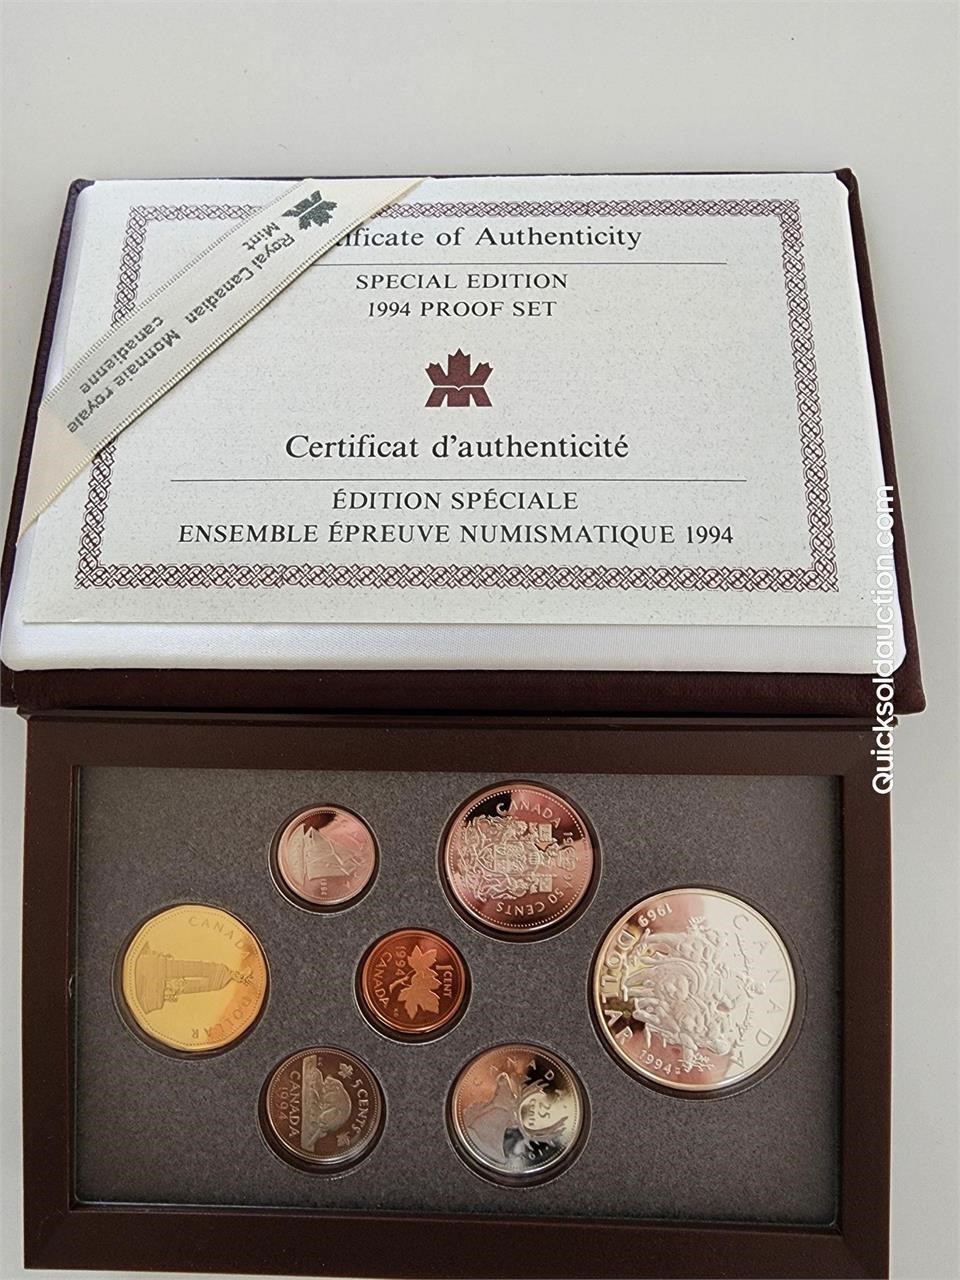 Special Edition 1994 Proof Set RCM